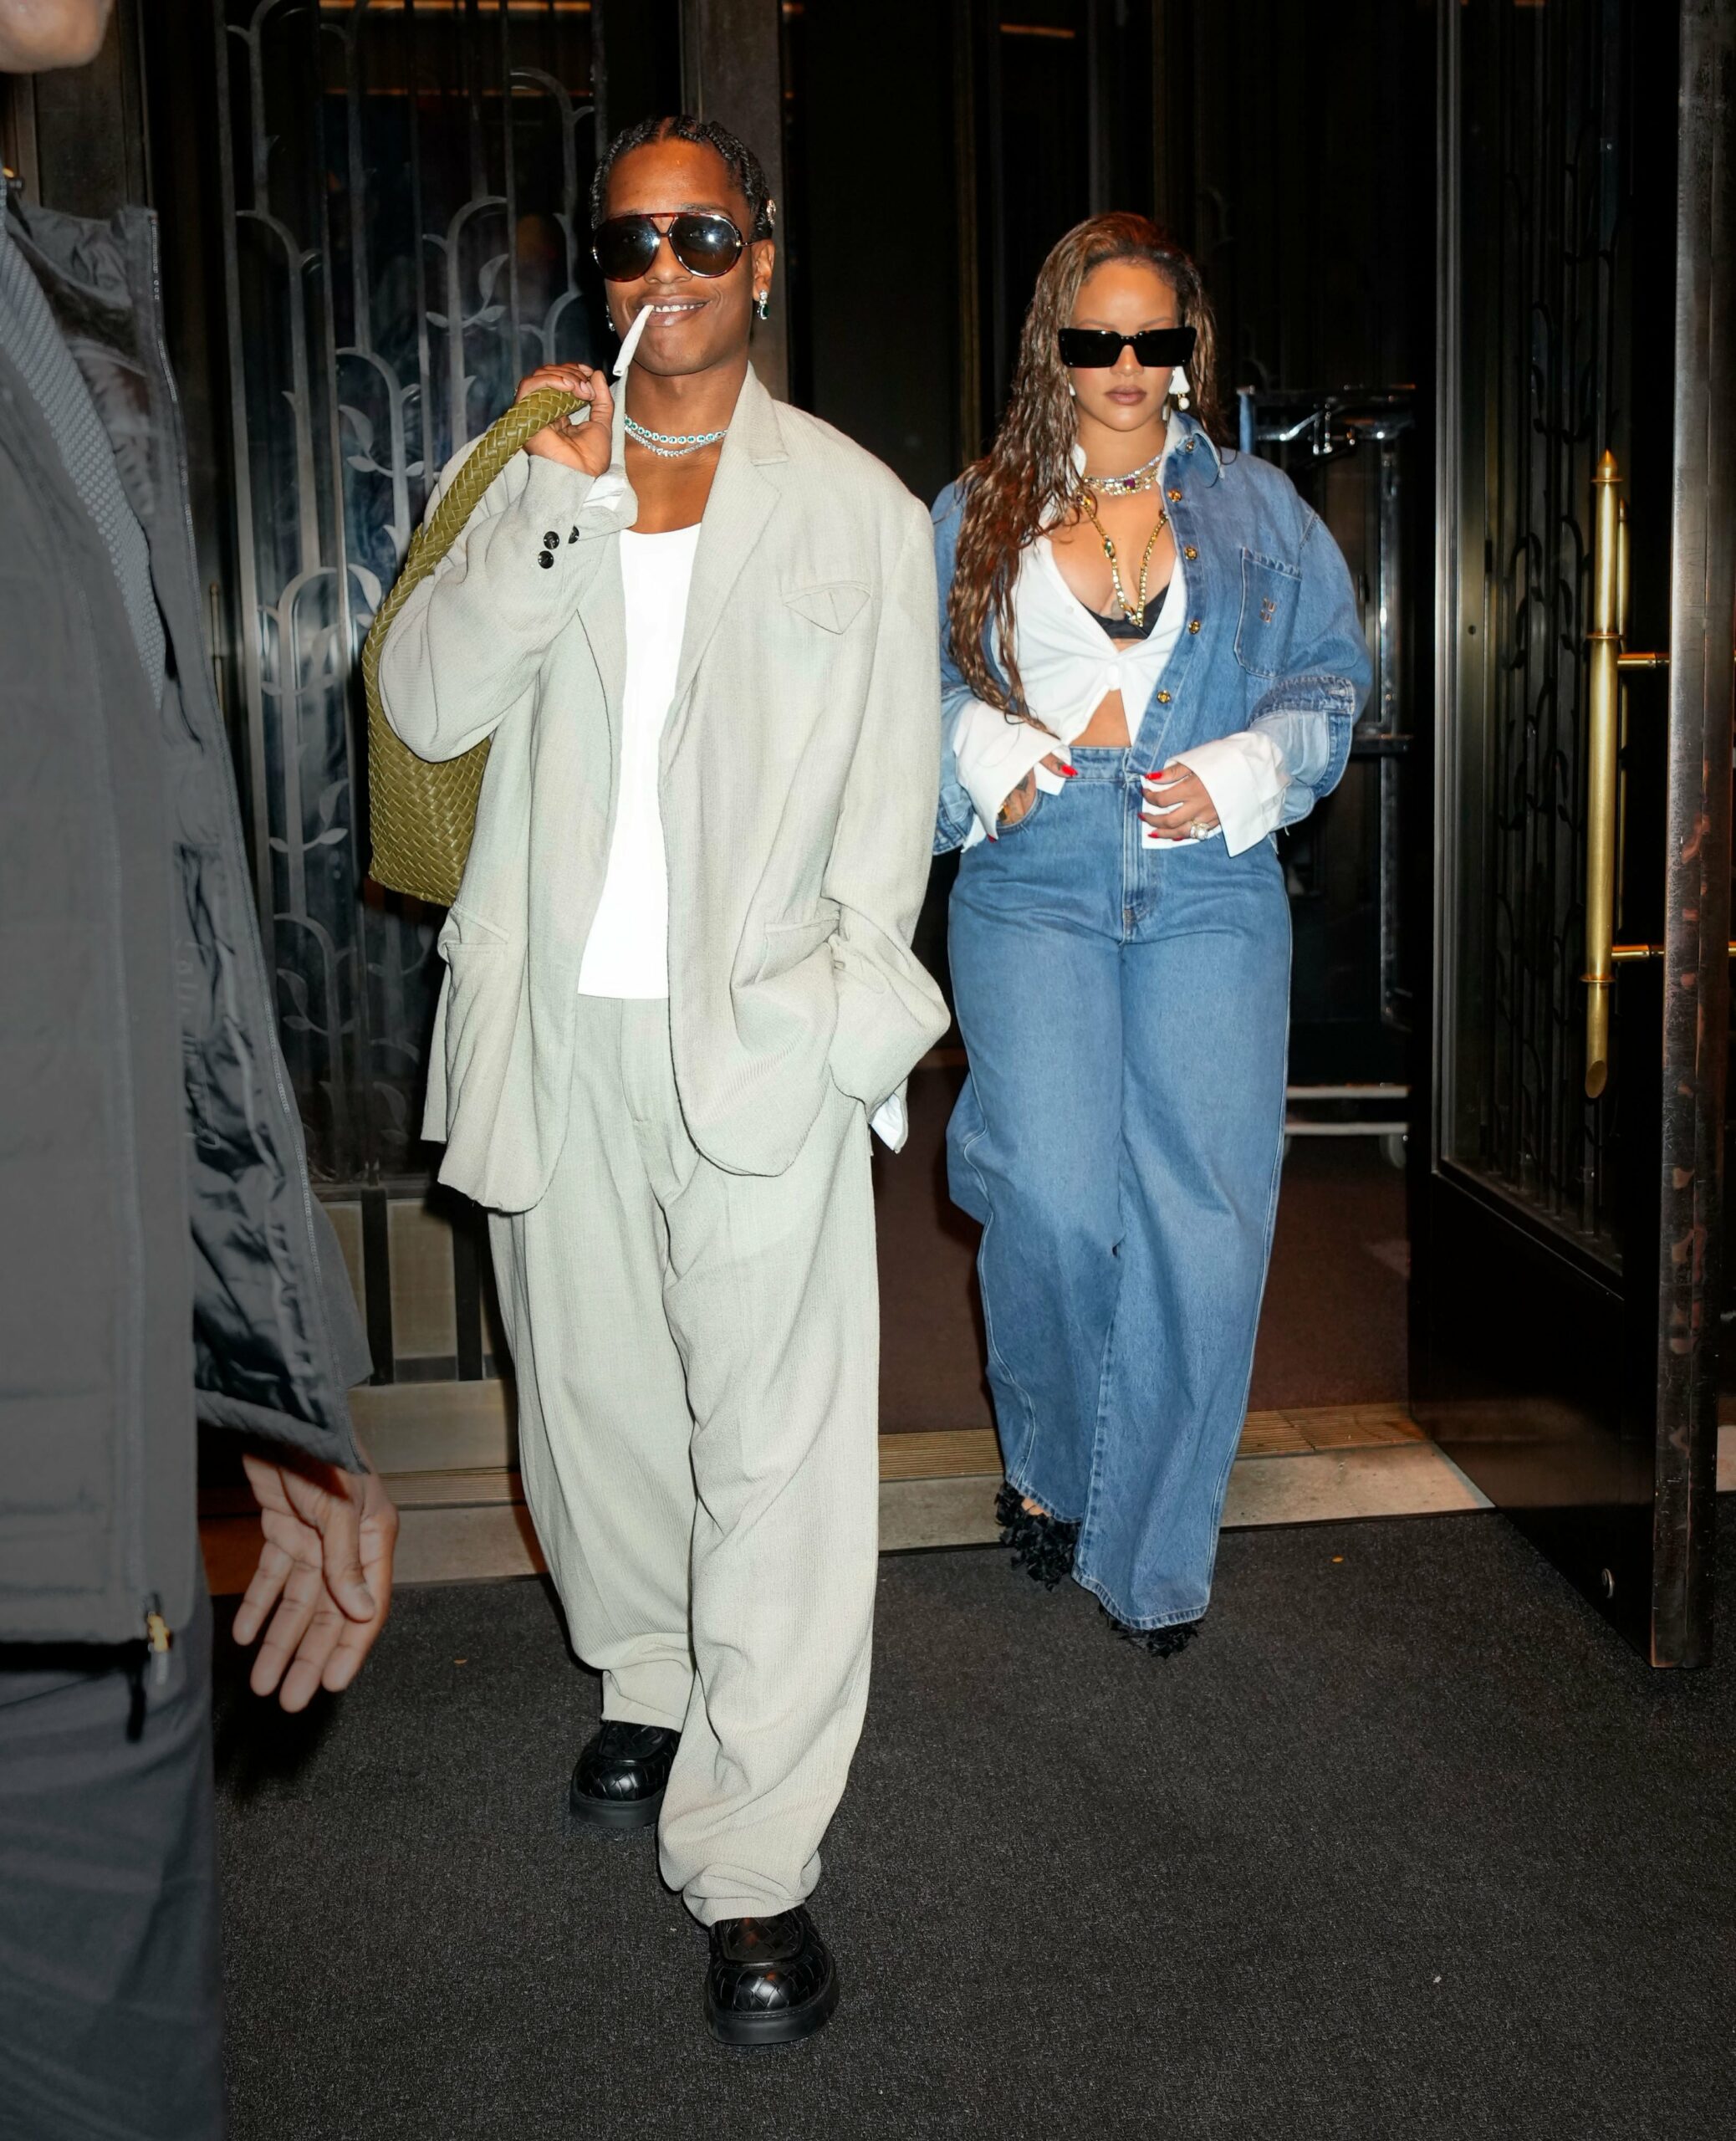 Rihanna and A$AP Rocky Have Mastered the Art of Couples Dressing